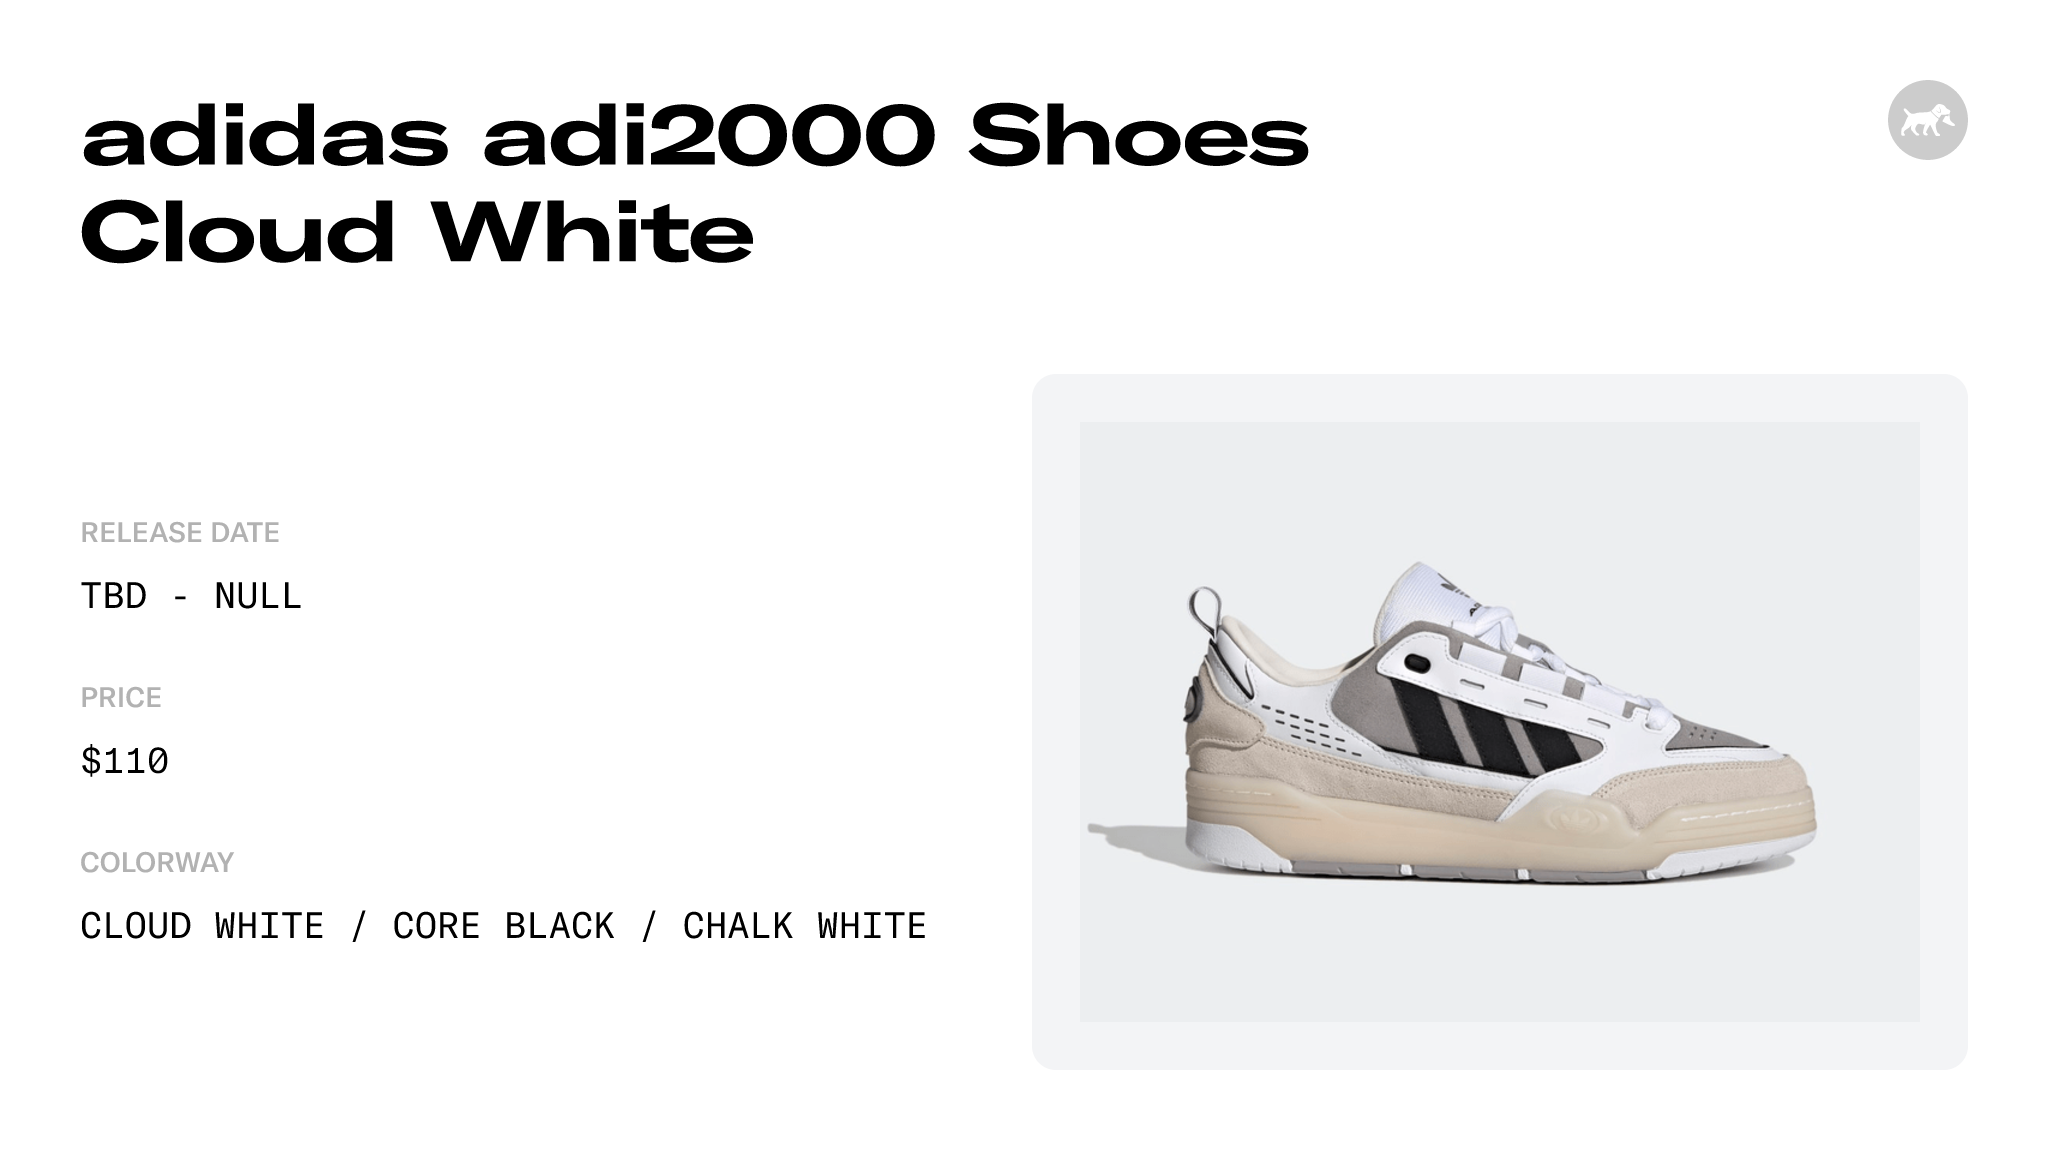 adidas adi2000 Shoes Cloud GV9544 White and Raffles Release - Date